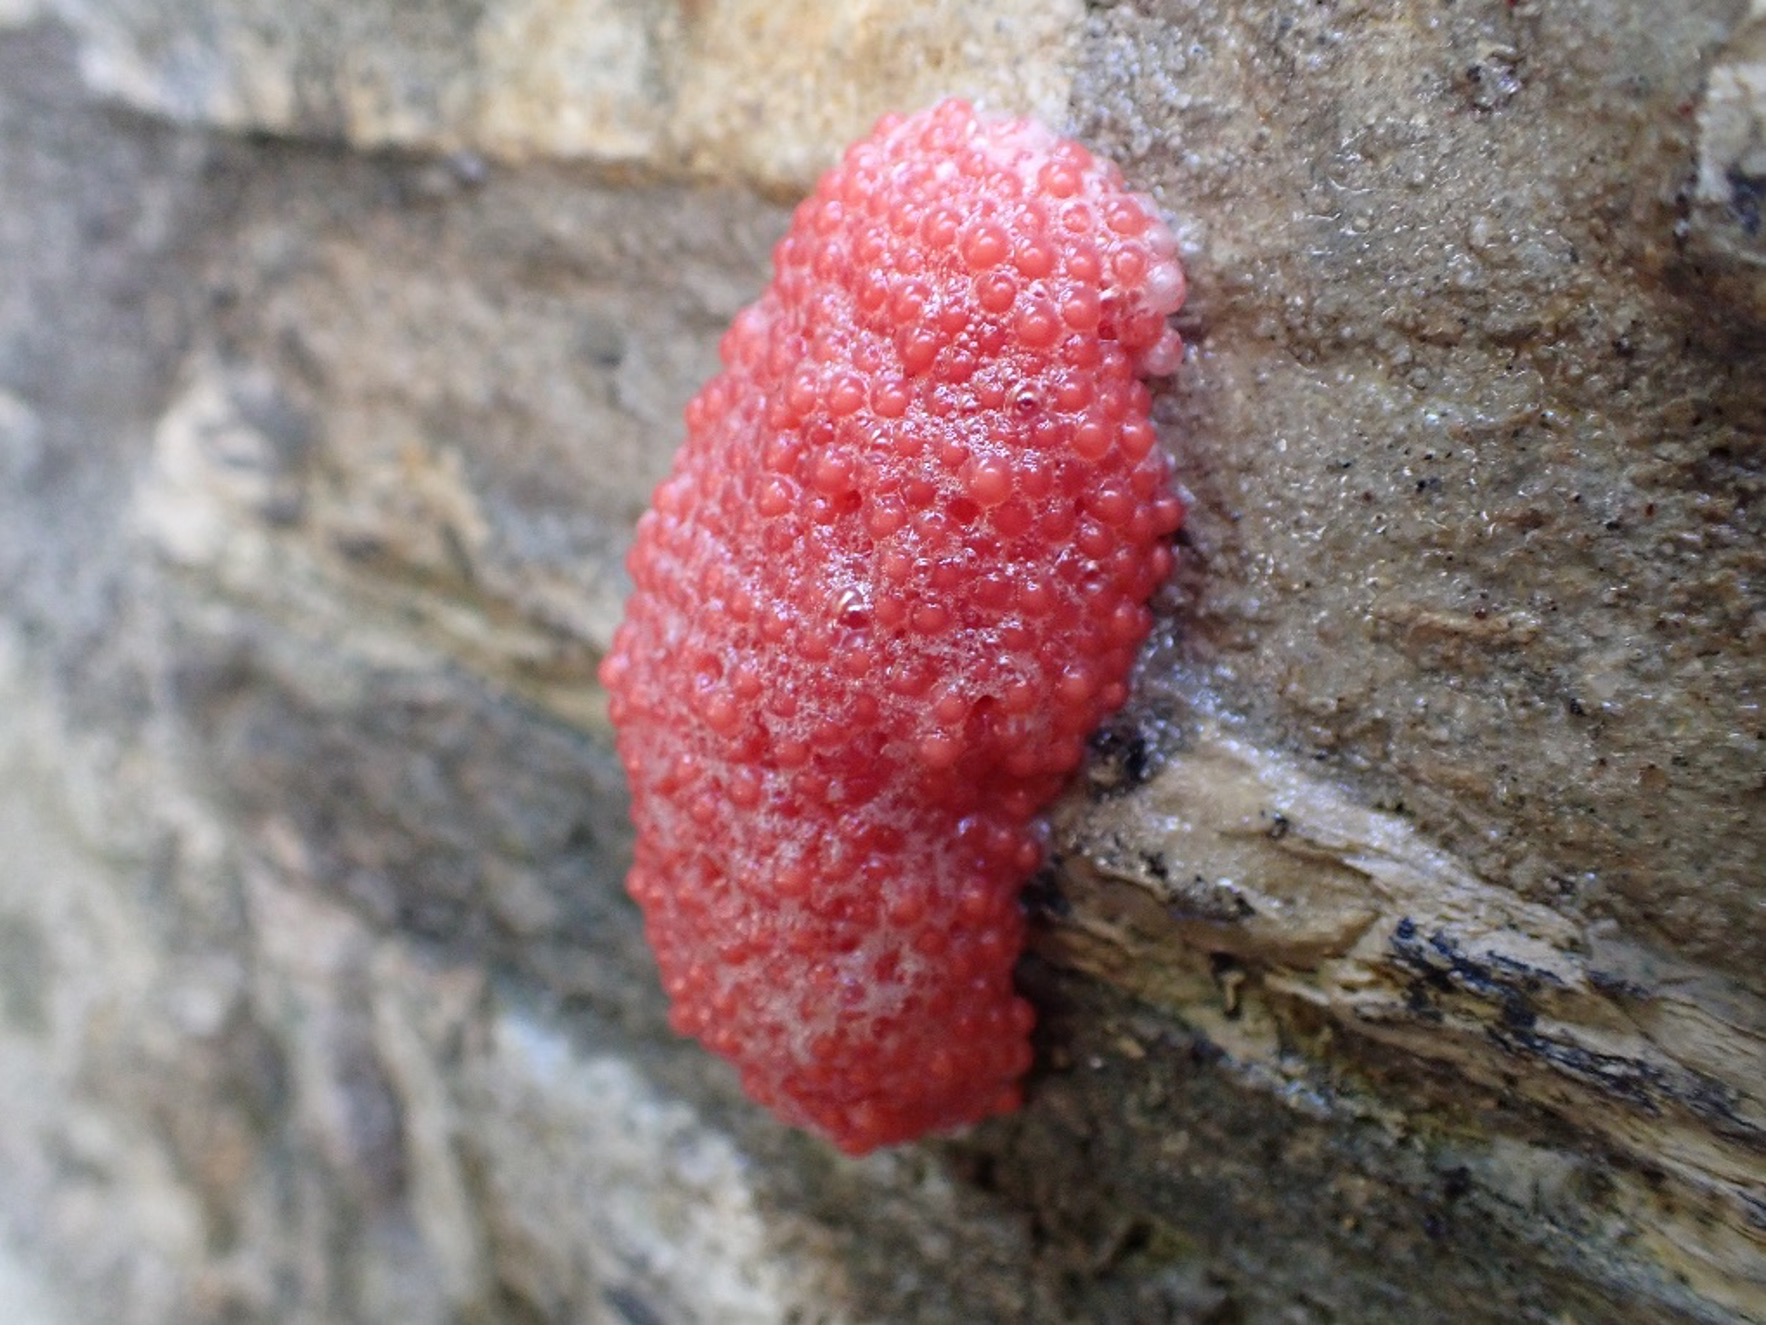 Apple snail egg casing found on wall.